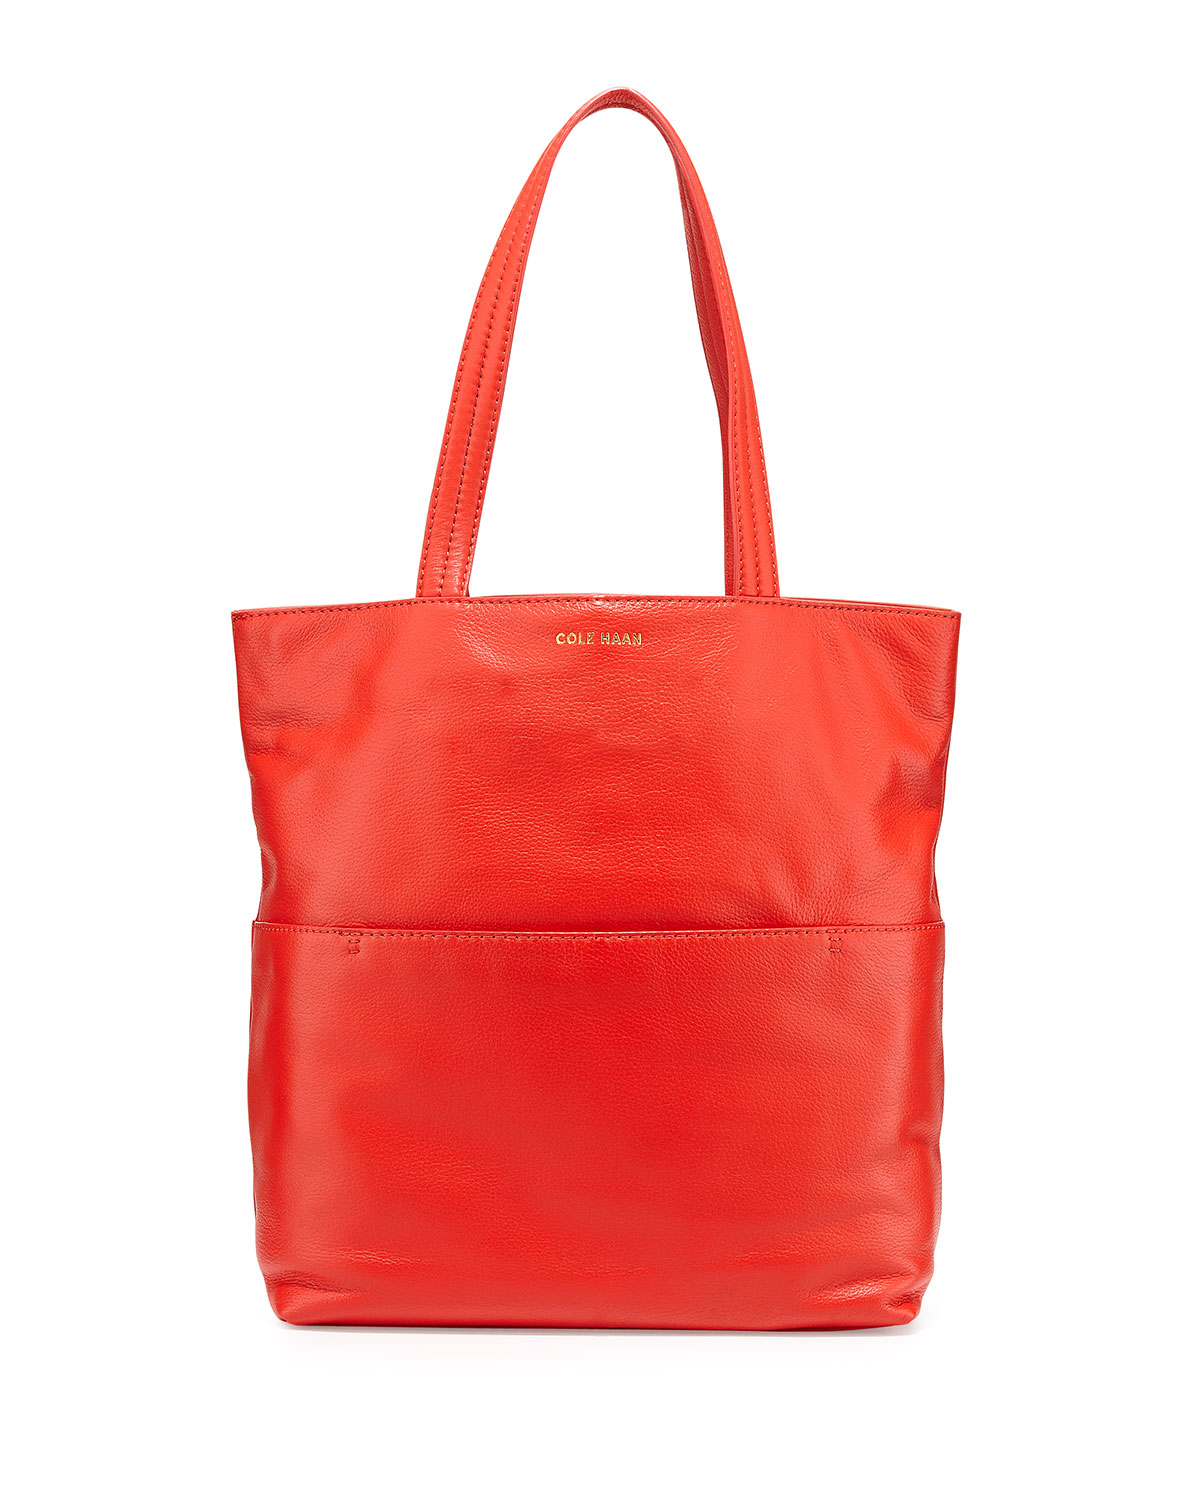 Cole haan Birch Leather Tote Bag in Red | Lyst